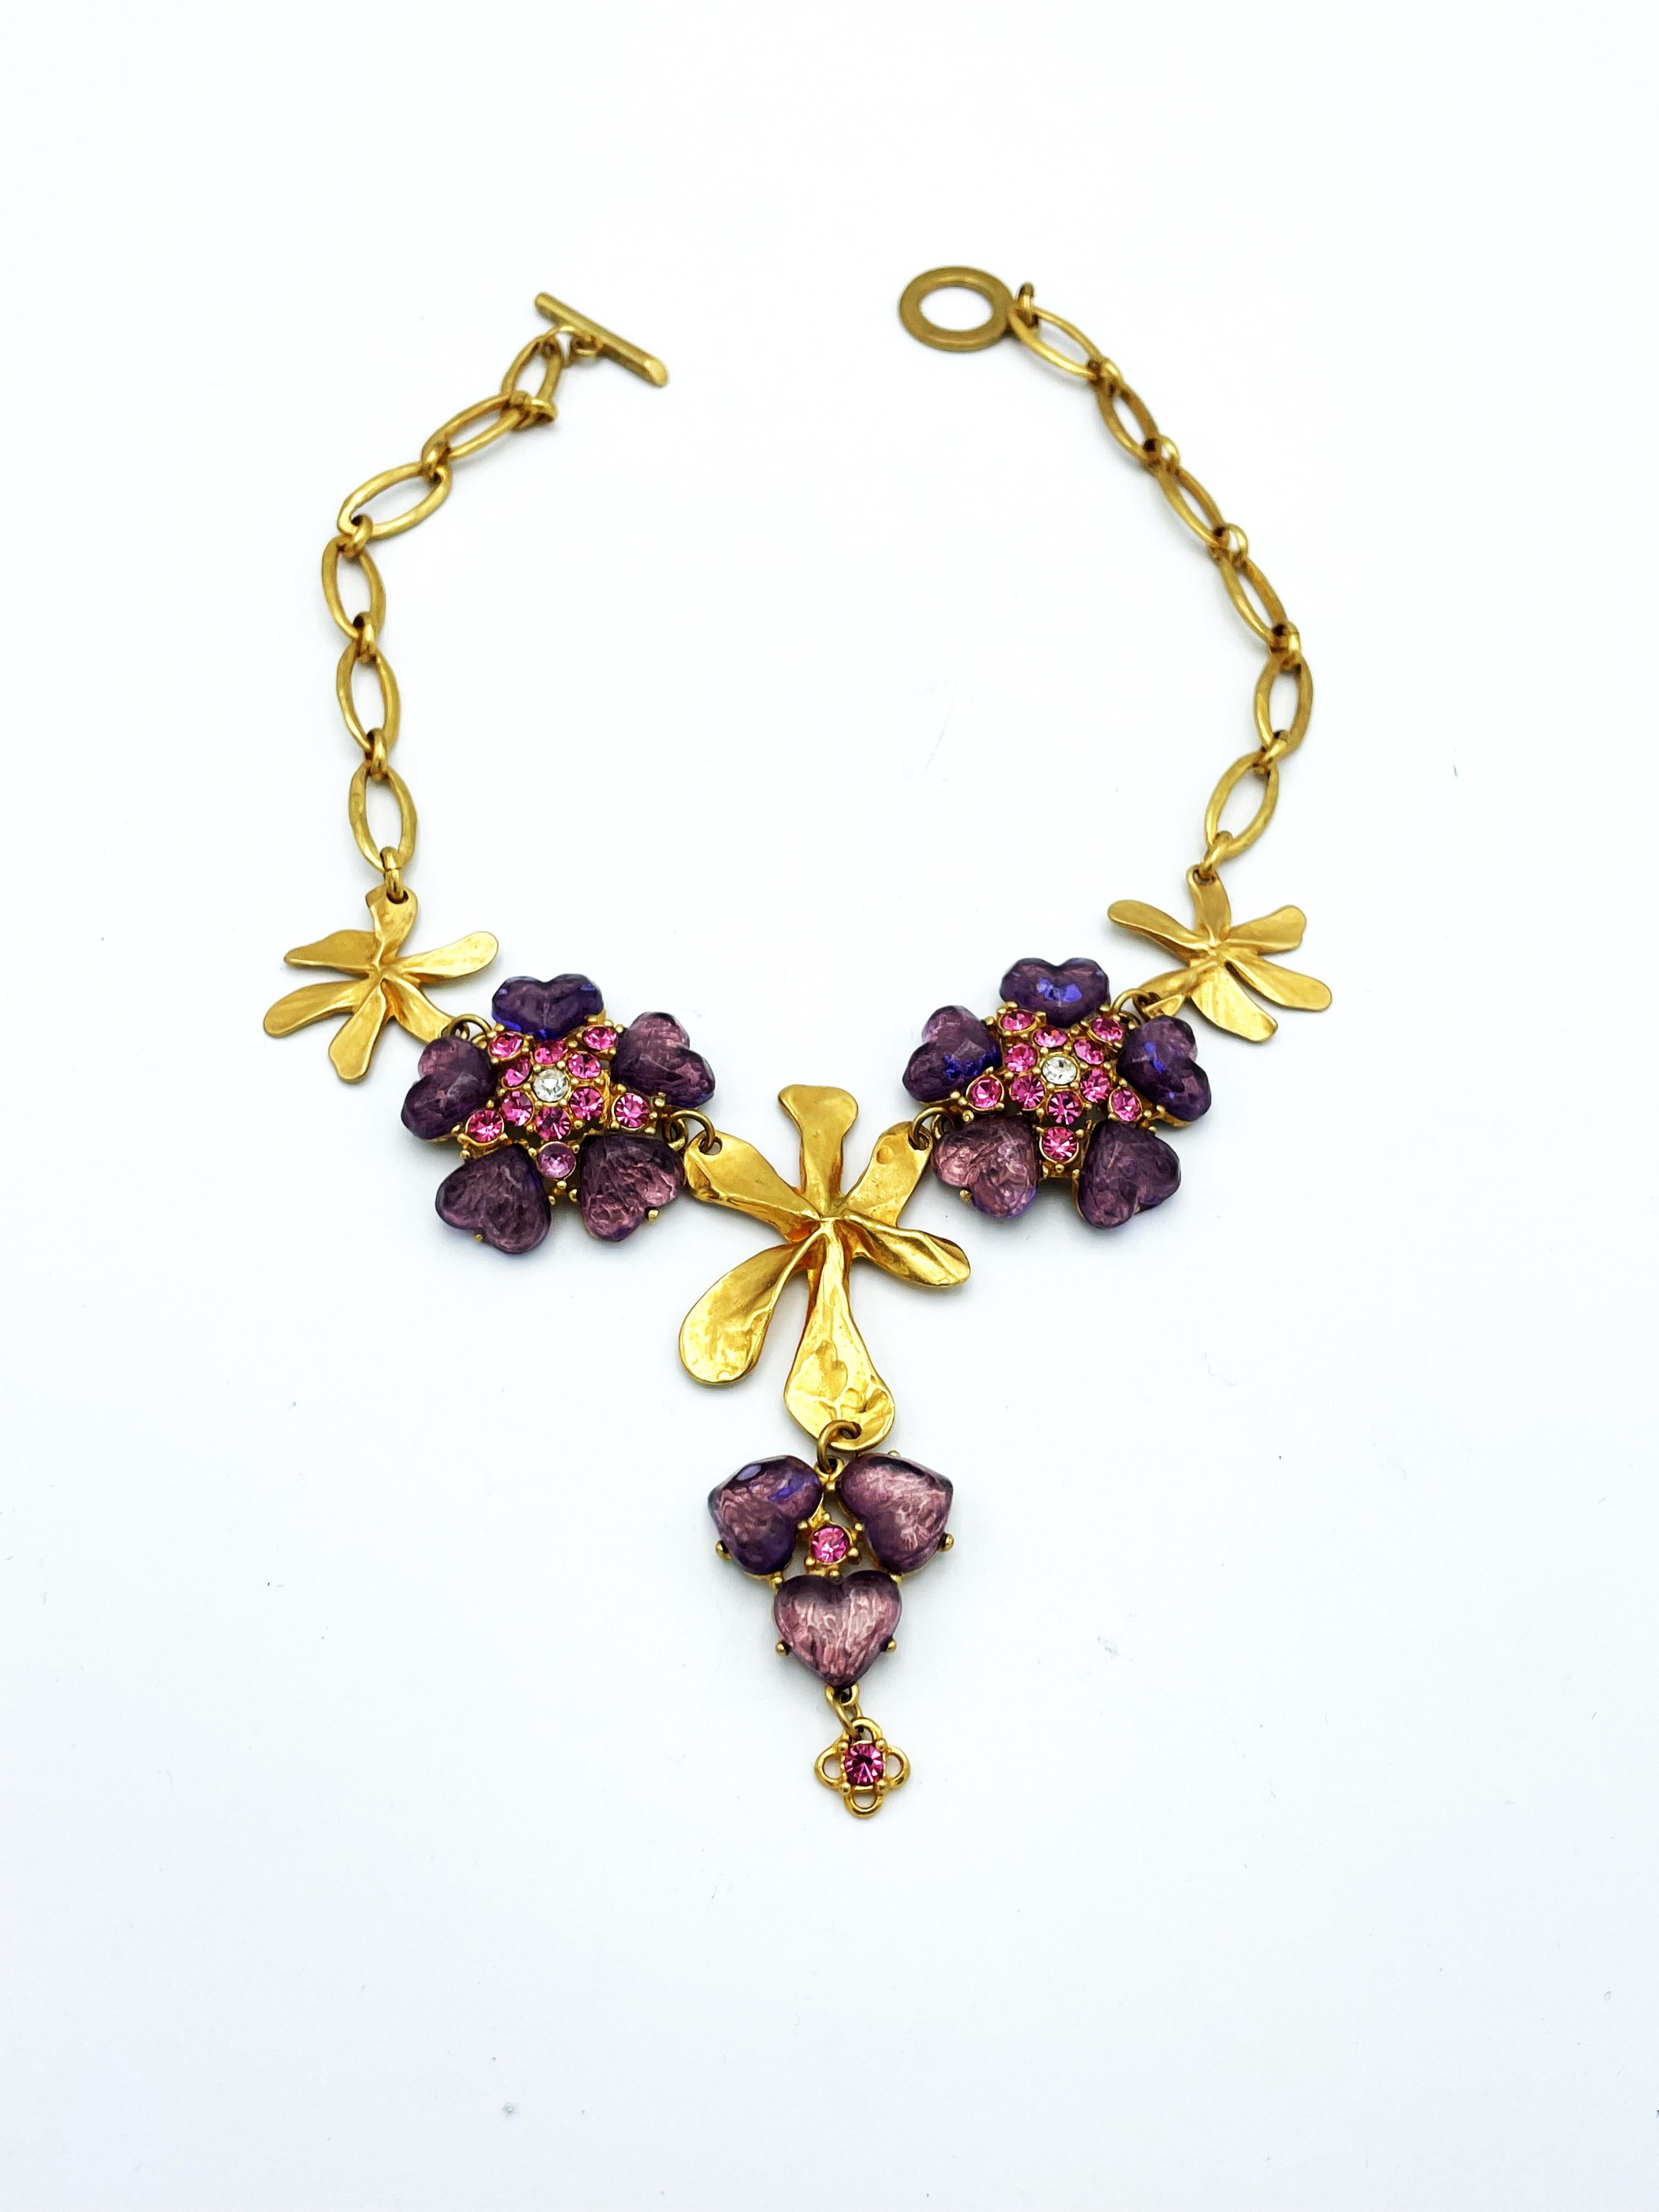 Beautiful necklace for Valentine's Day.
Necklace of 3 flowers with purple and pink glass stones. The purple stones are all heart shaped!
Measurement
Full lenght 43 cm, 2 flowers 4 cm in diameter, the smallest flower  with 3 hearts 2 cm x 3